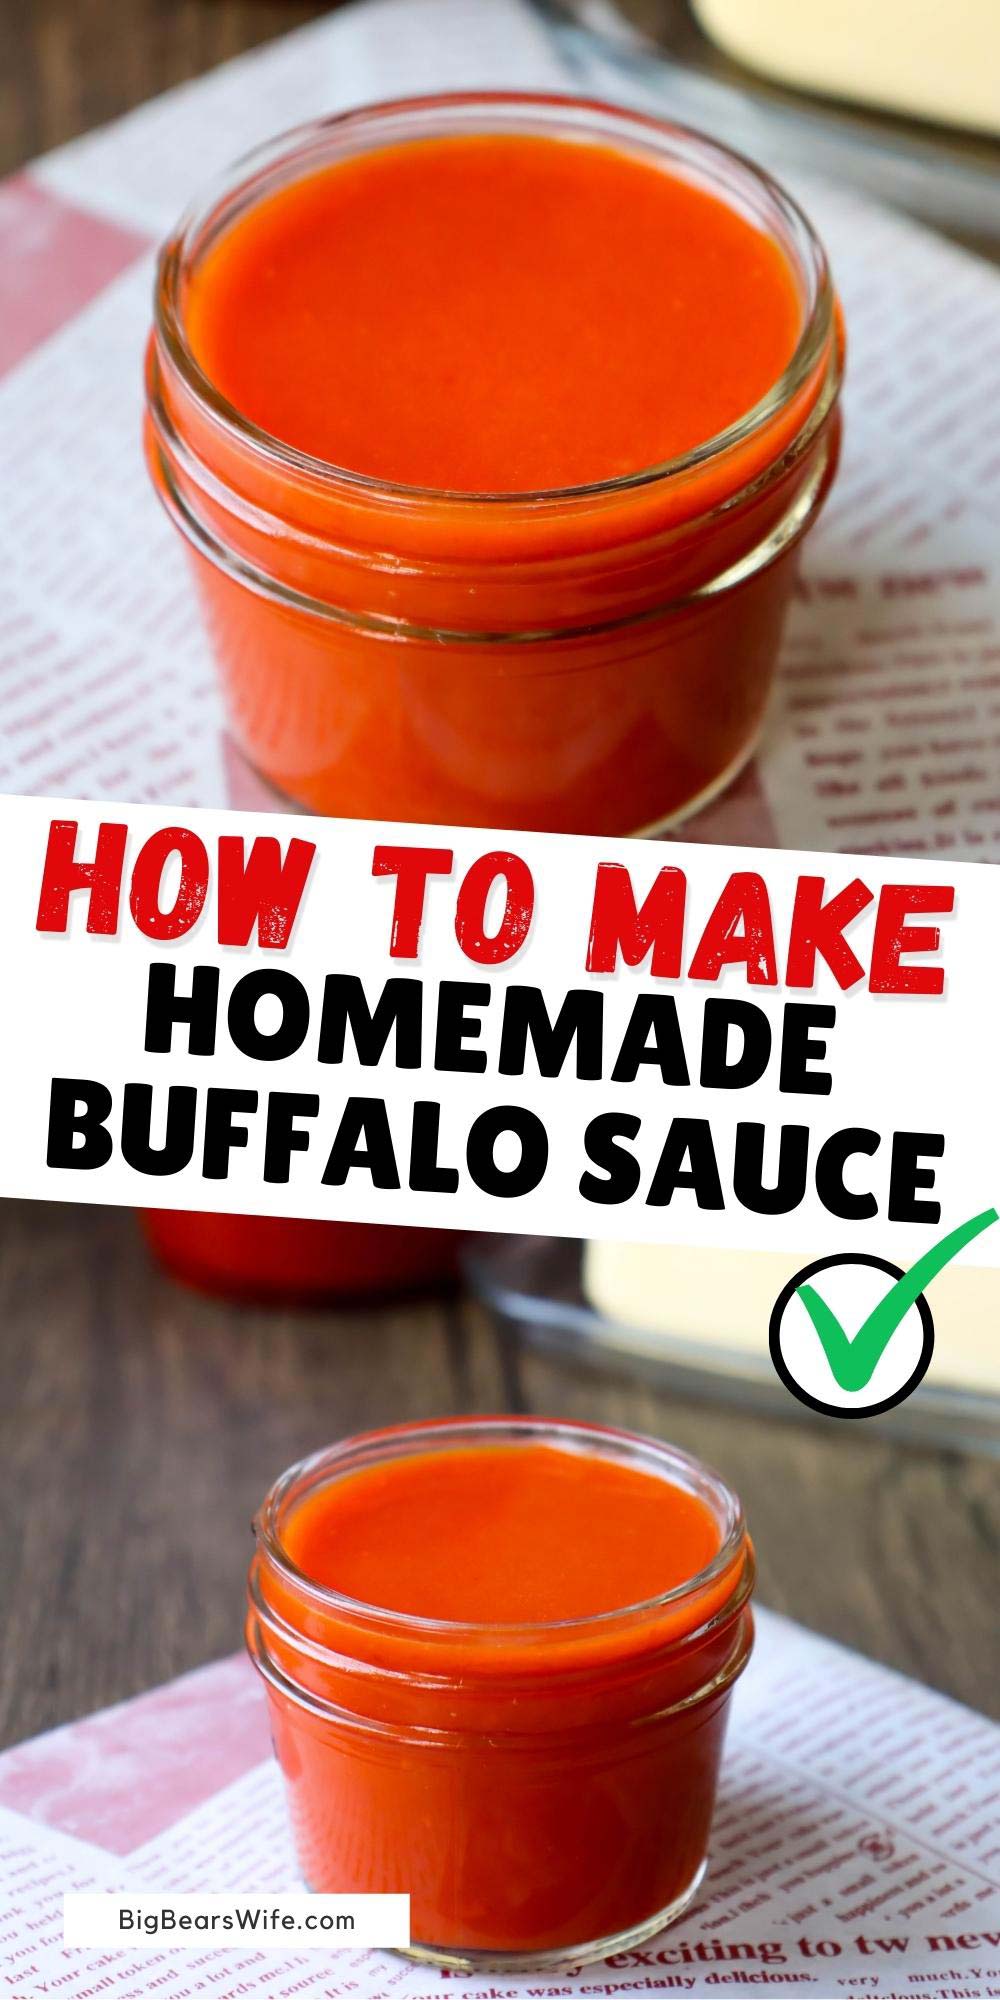 This homemade Texas Pete Buffalo sauce is so easy to make and comes out perfect every time! It's great for tossing chicken wings, drizzling on pizzas, topping shredded chicken sandwiches and making dips! via @bigbearswife